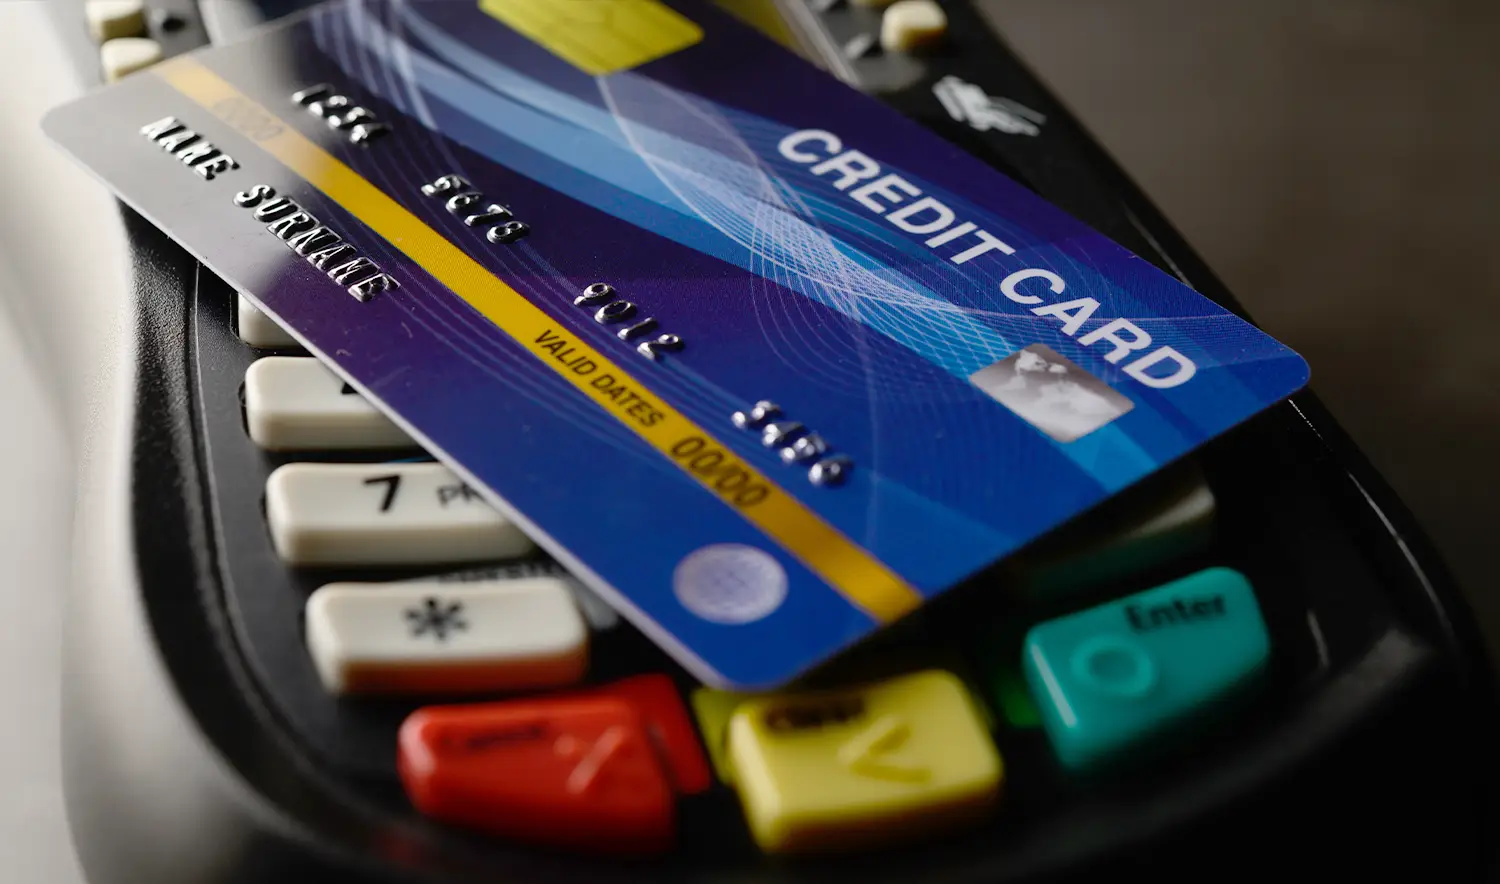 An image of a credit card and credit card reader, being used by a consumer at a point of sale